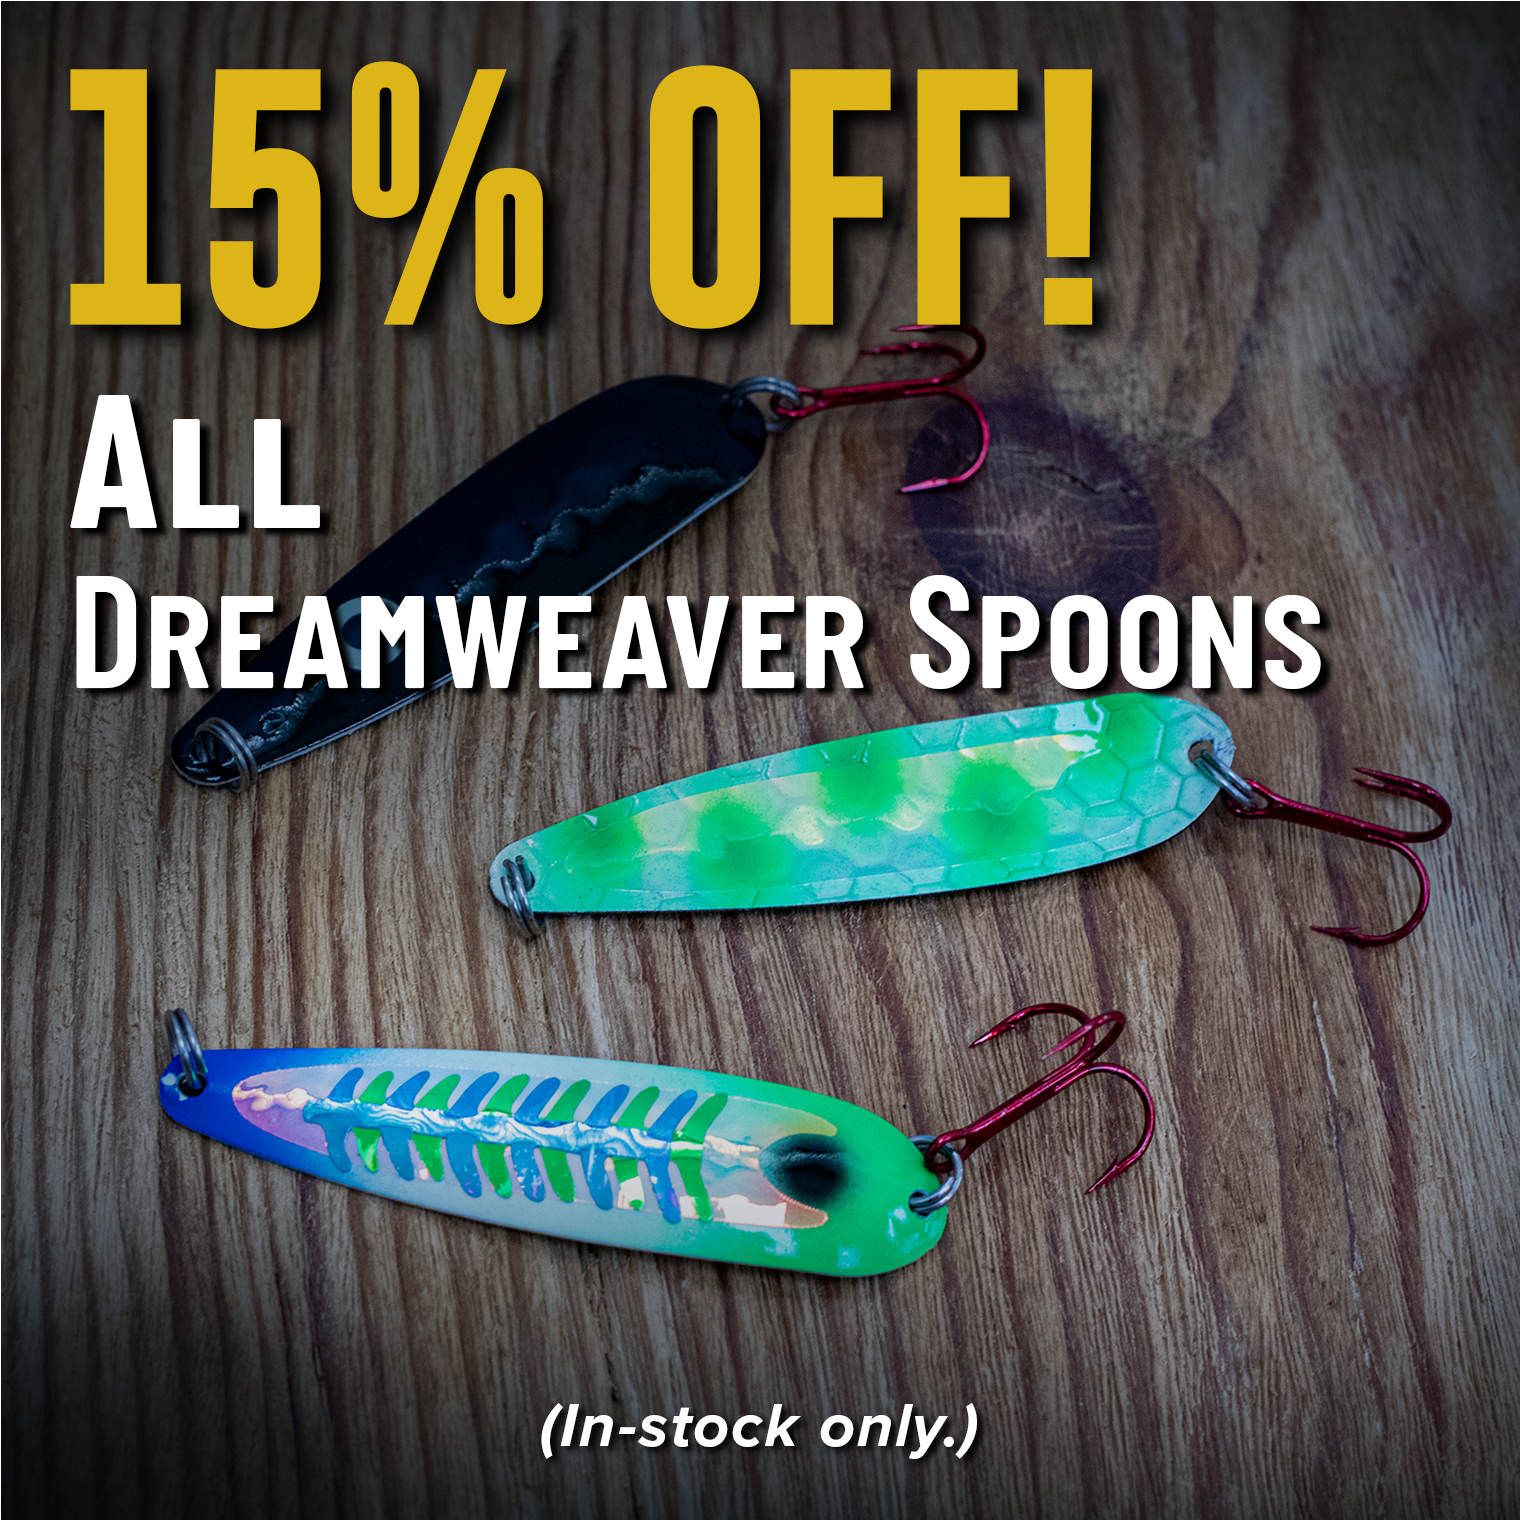 15% Off! All Dreamweaver Spoons (In-stock only.)